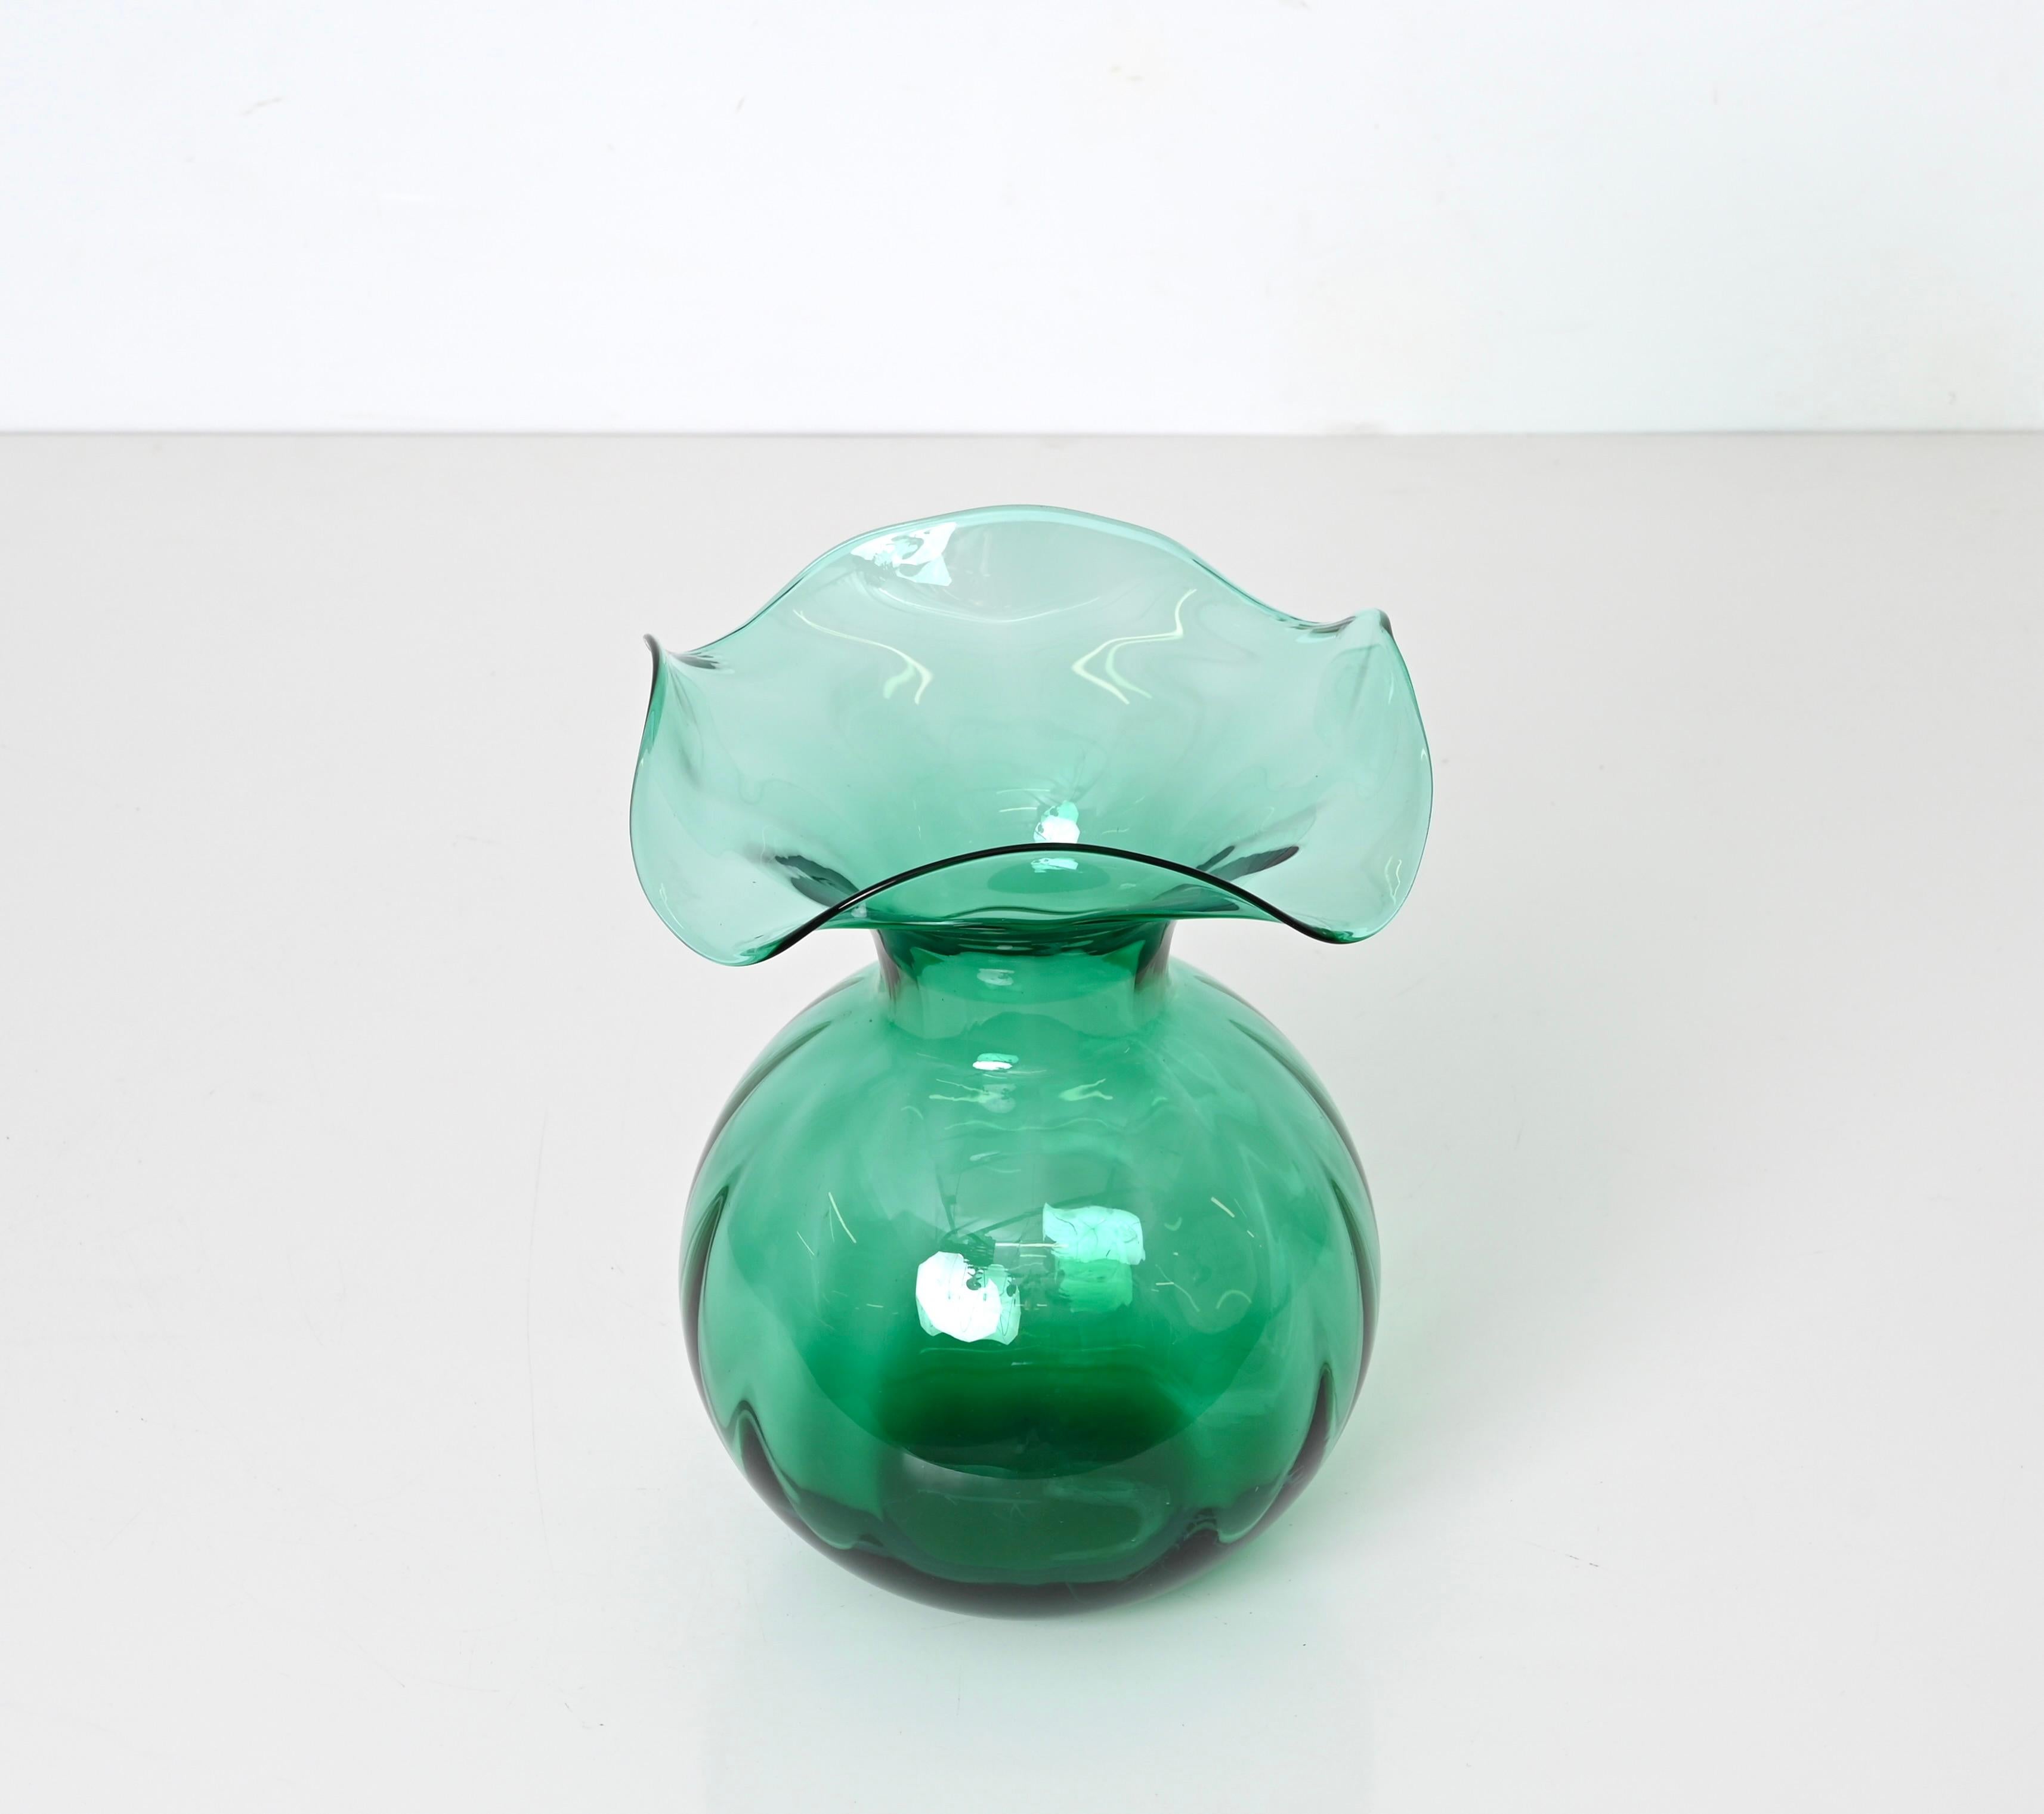 Amazing midcentury green glass vase, this wonderful object was hand-made by Industria Vetraria Valdarnese (IVV) in Italy in during the 1970s. 

The sinous lines of this glass vase combined with the wonderful green glass make this vase incredibly